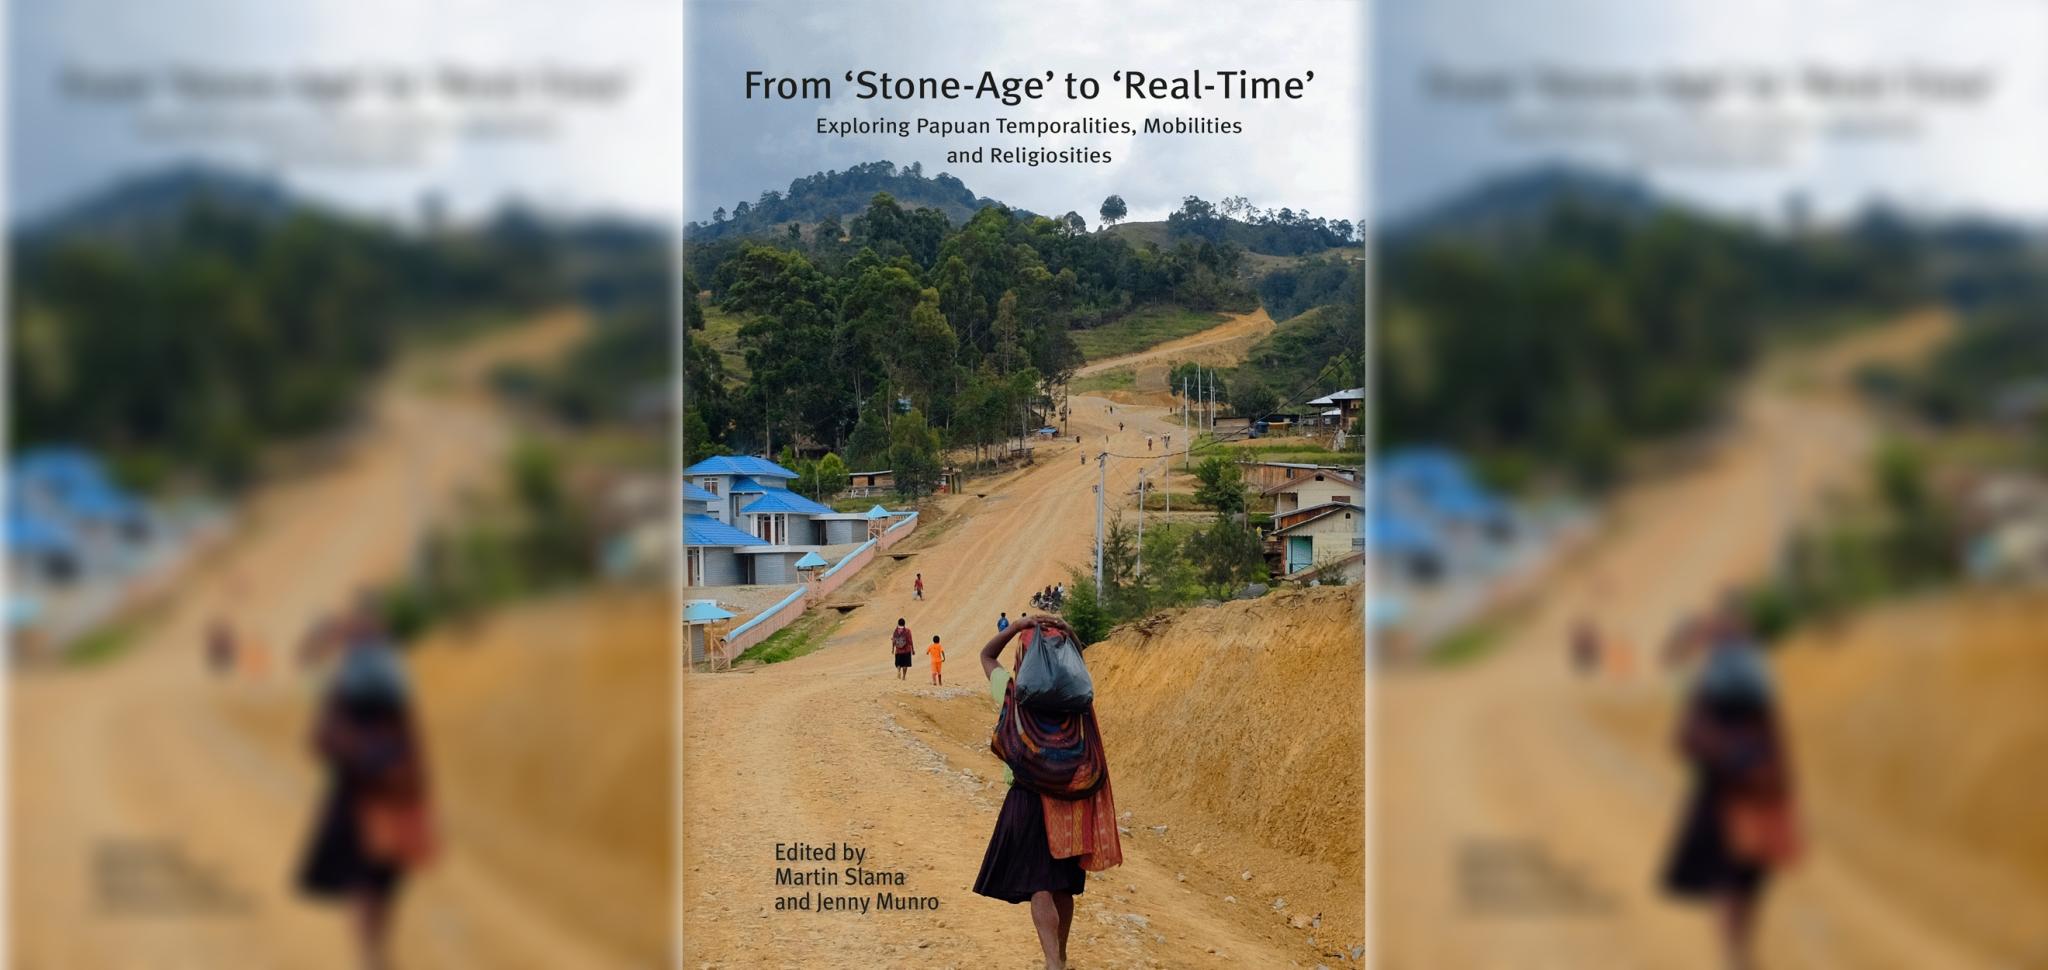 From 'Stone-Age' to 'Real-Time' Exploring Papuan Temporalities, Mobilities and Religiosities